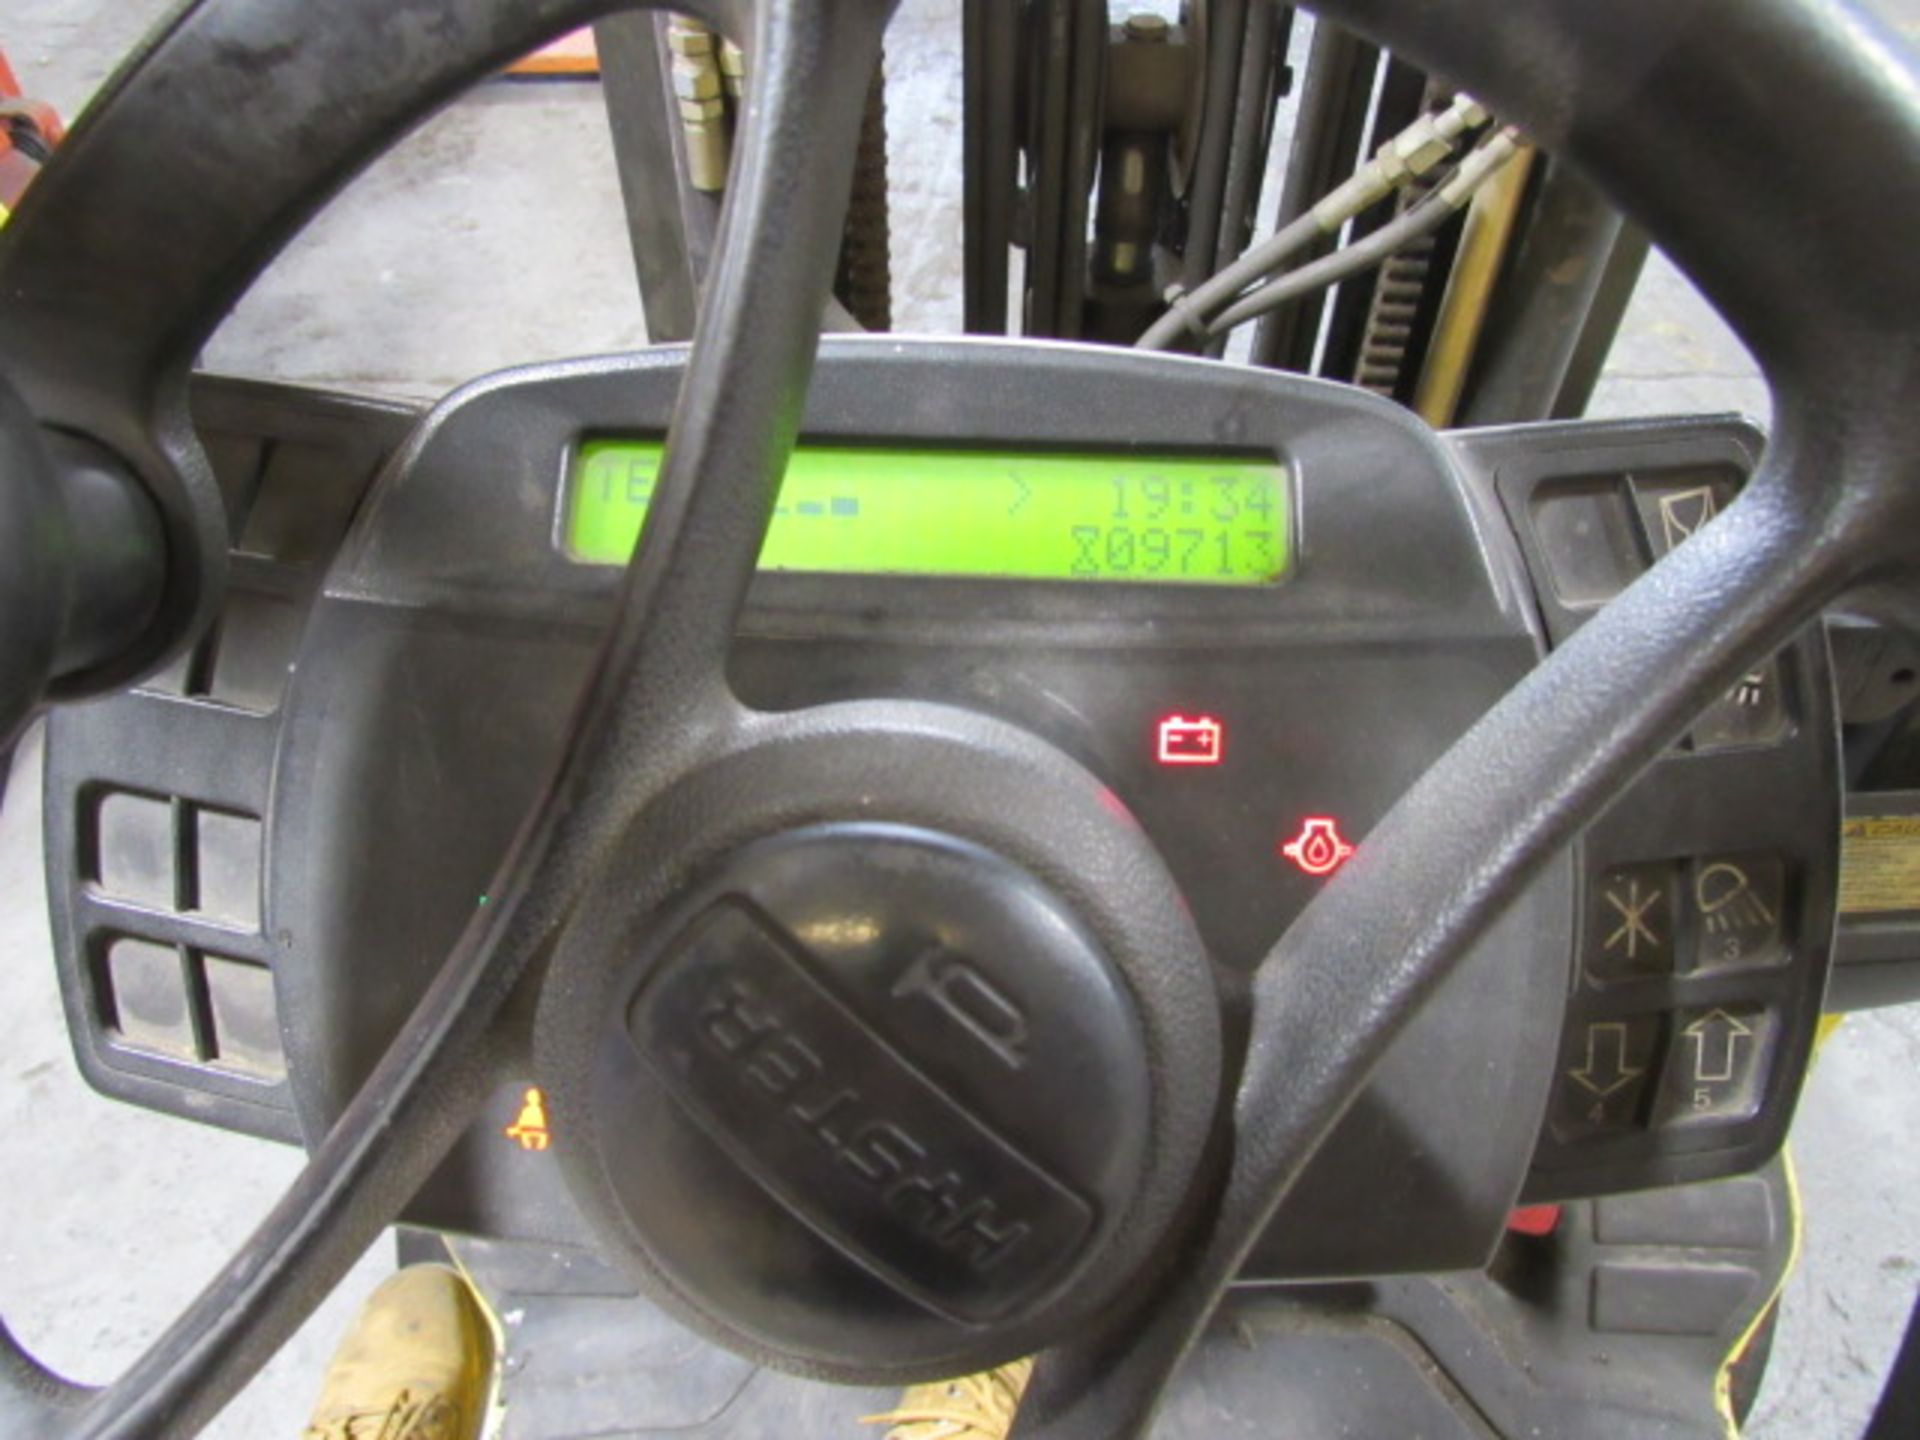 Hyster Model F50 5,000lb Capacity LP Gas Forklift - Image 5 of 8